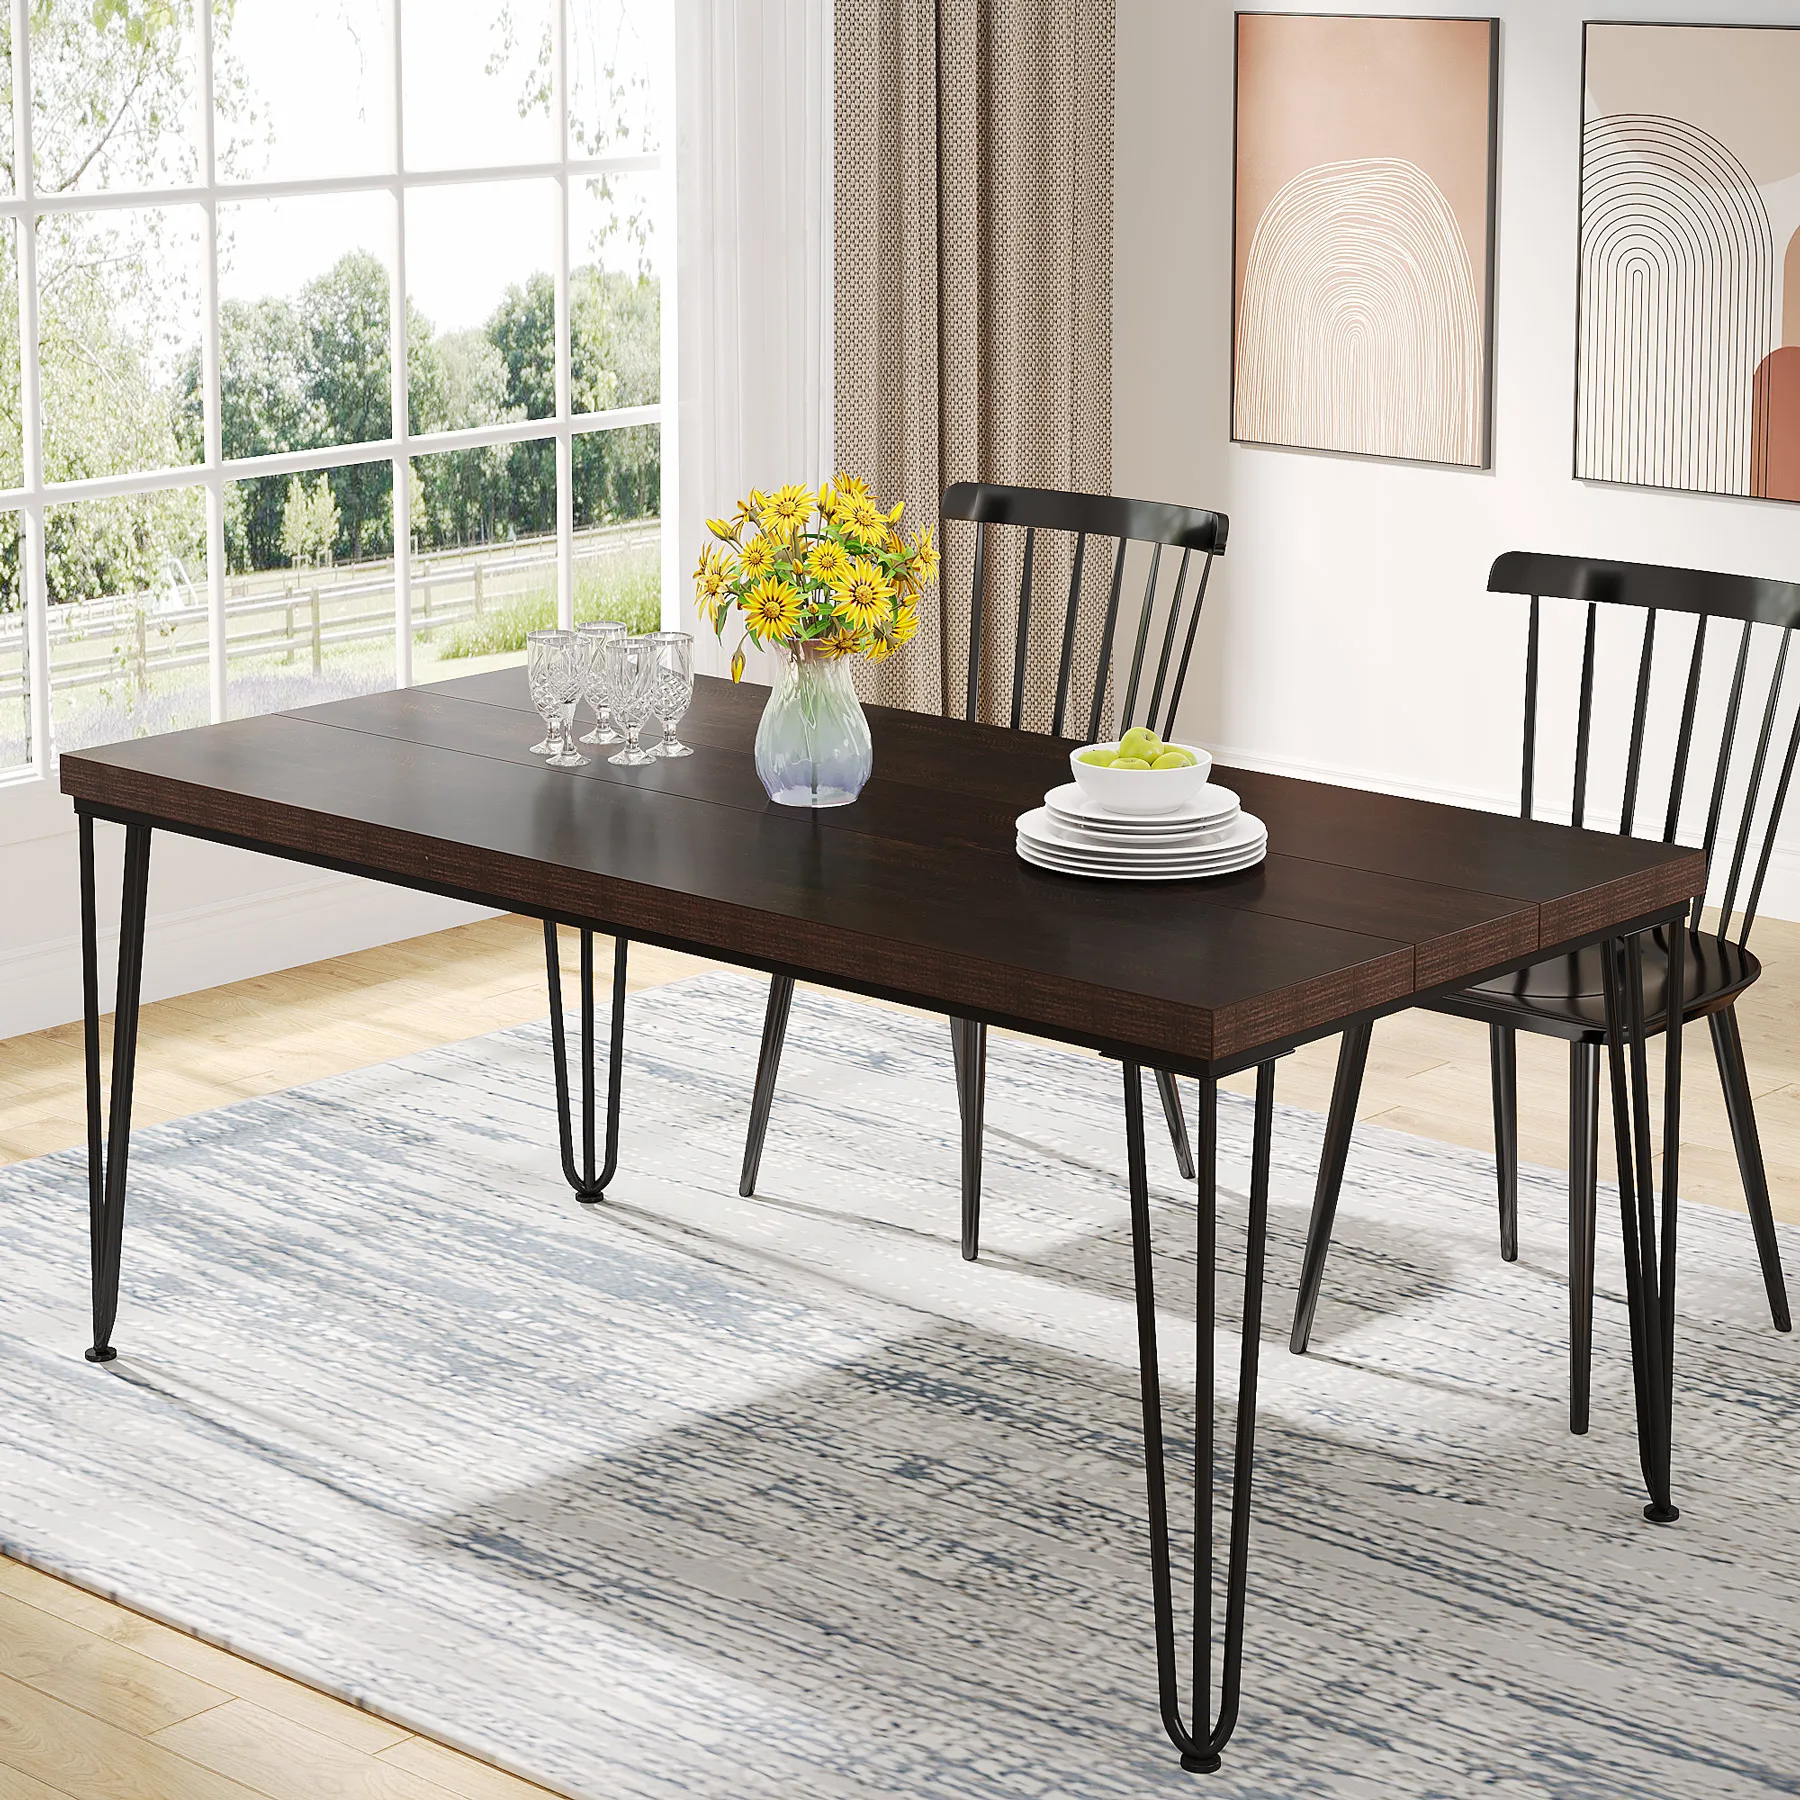 New Home Kitchen Hotel Modern Square Wood Restaurant Dining Tables For 6